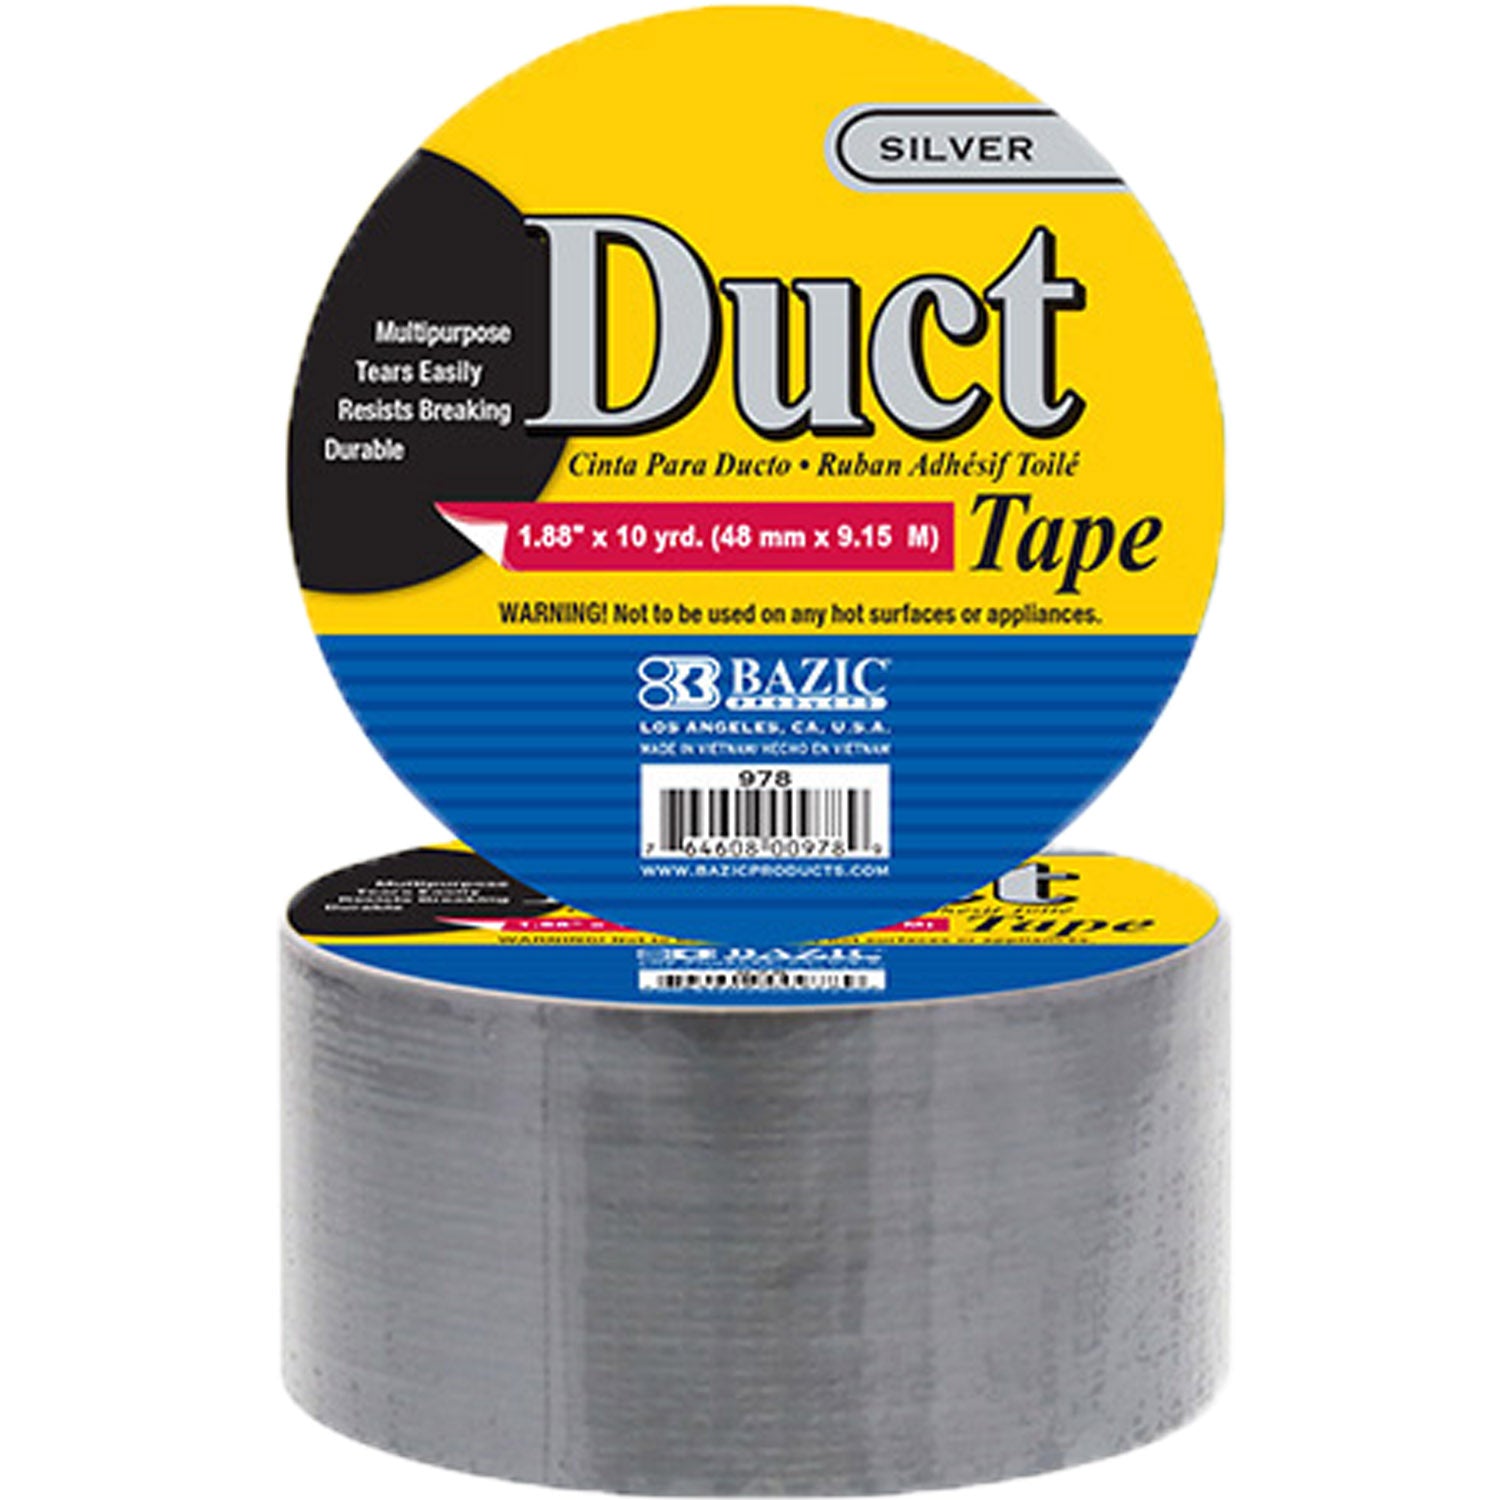 Duct Tape Silver Color Roll | 1.88